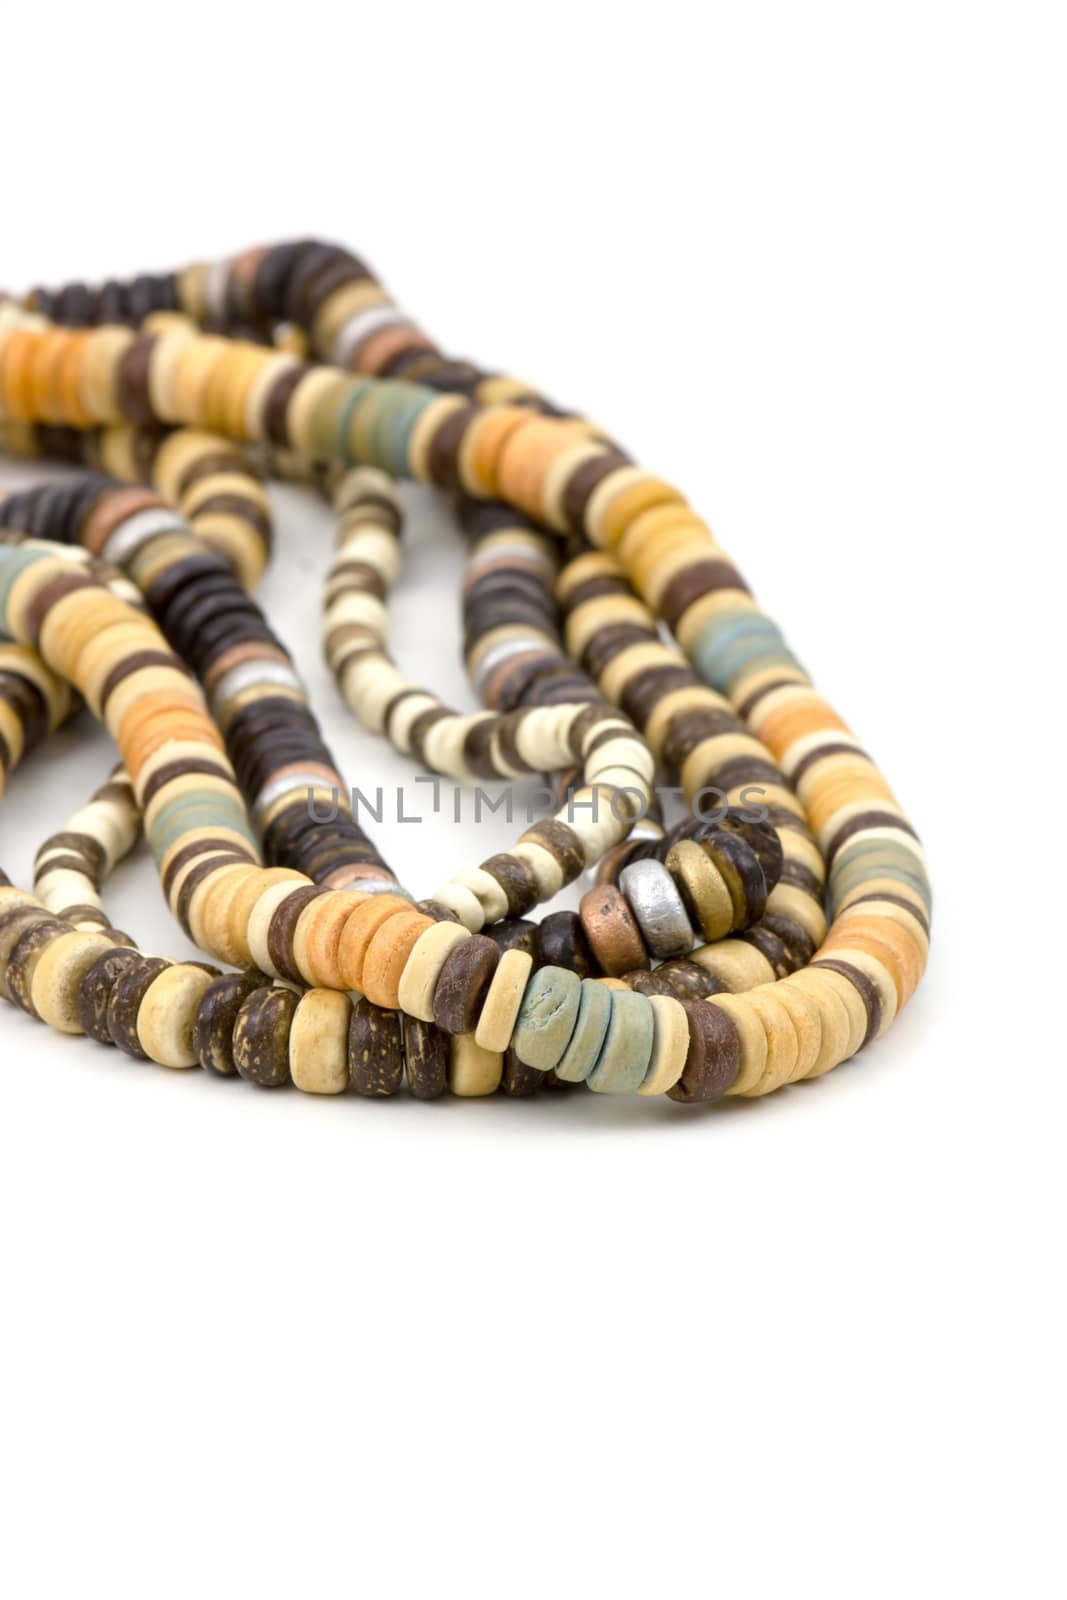 necklaces of alabaster beads